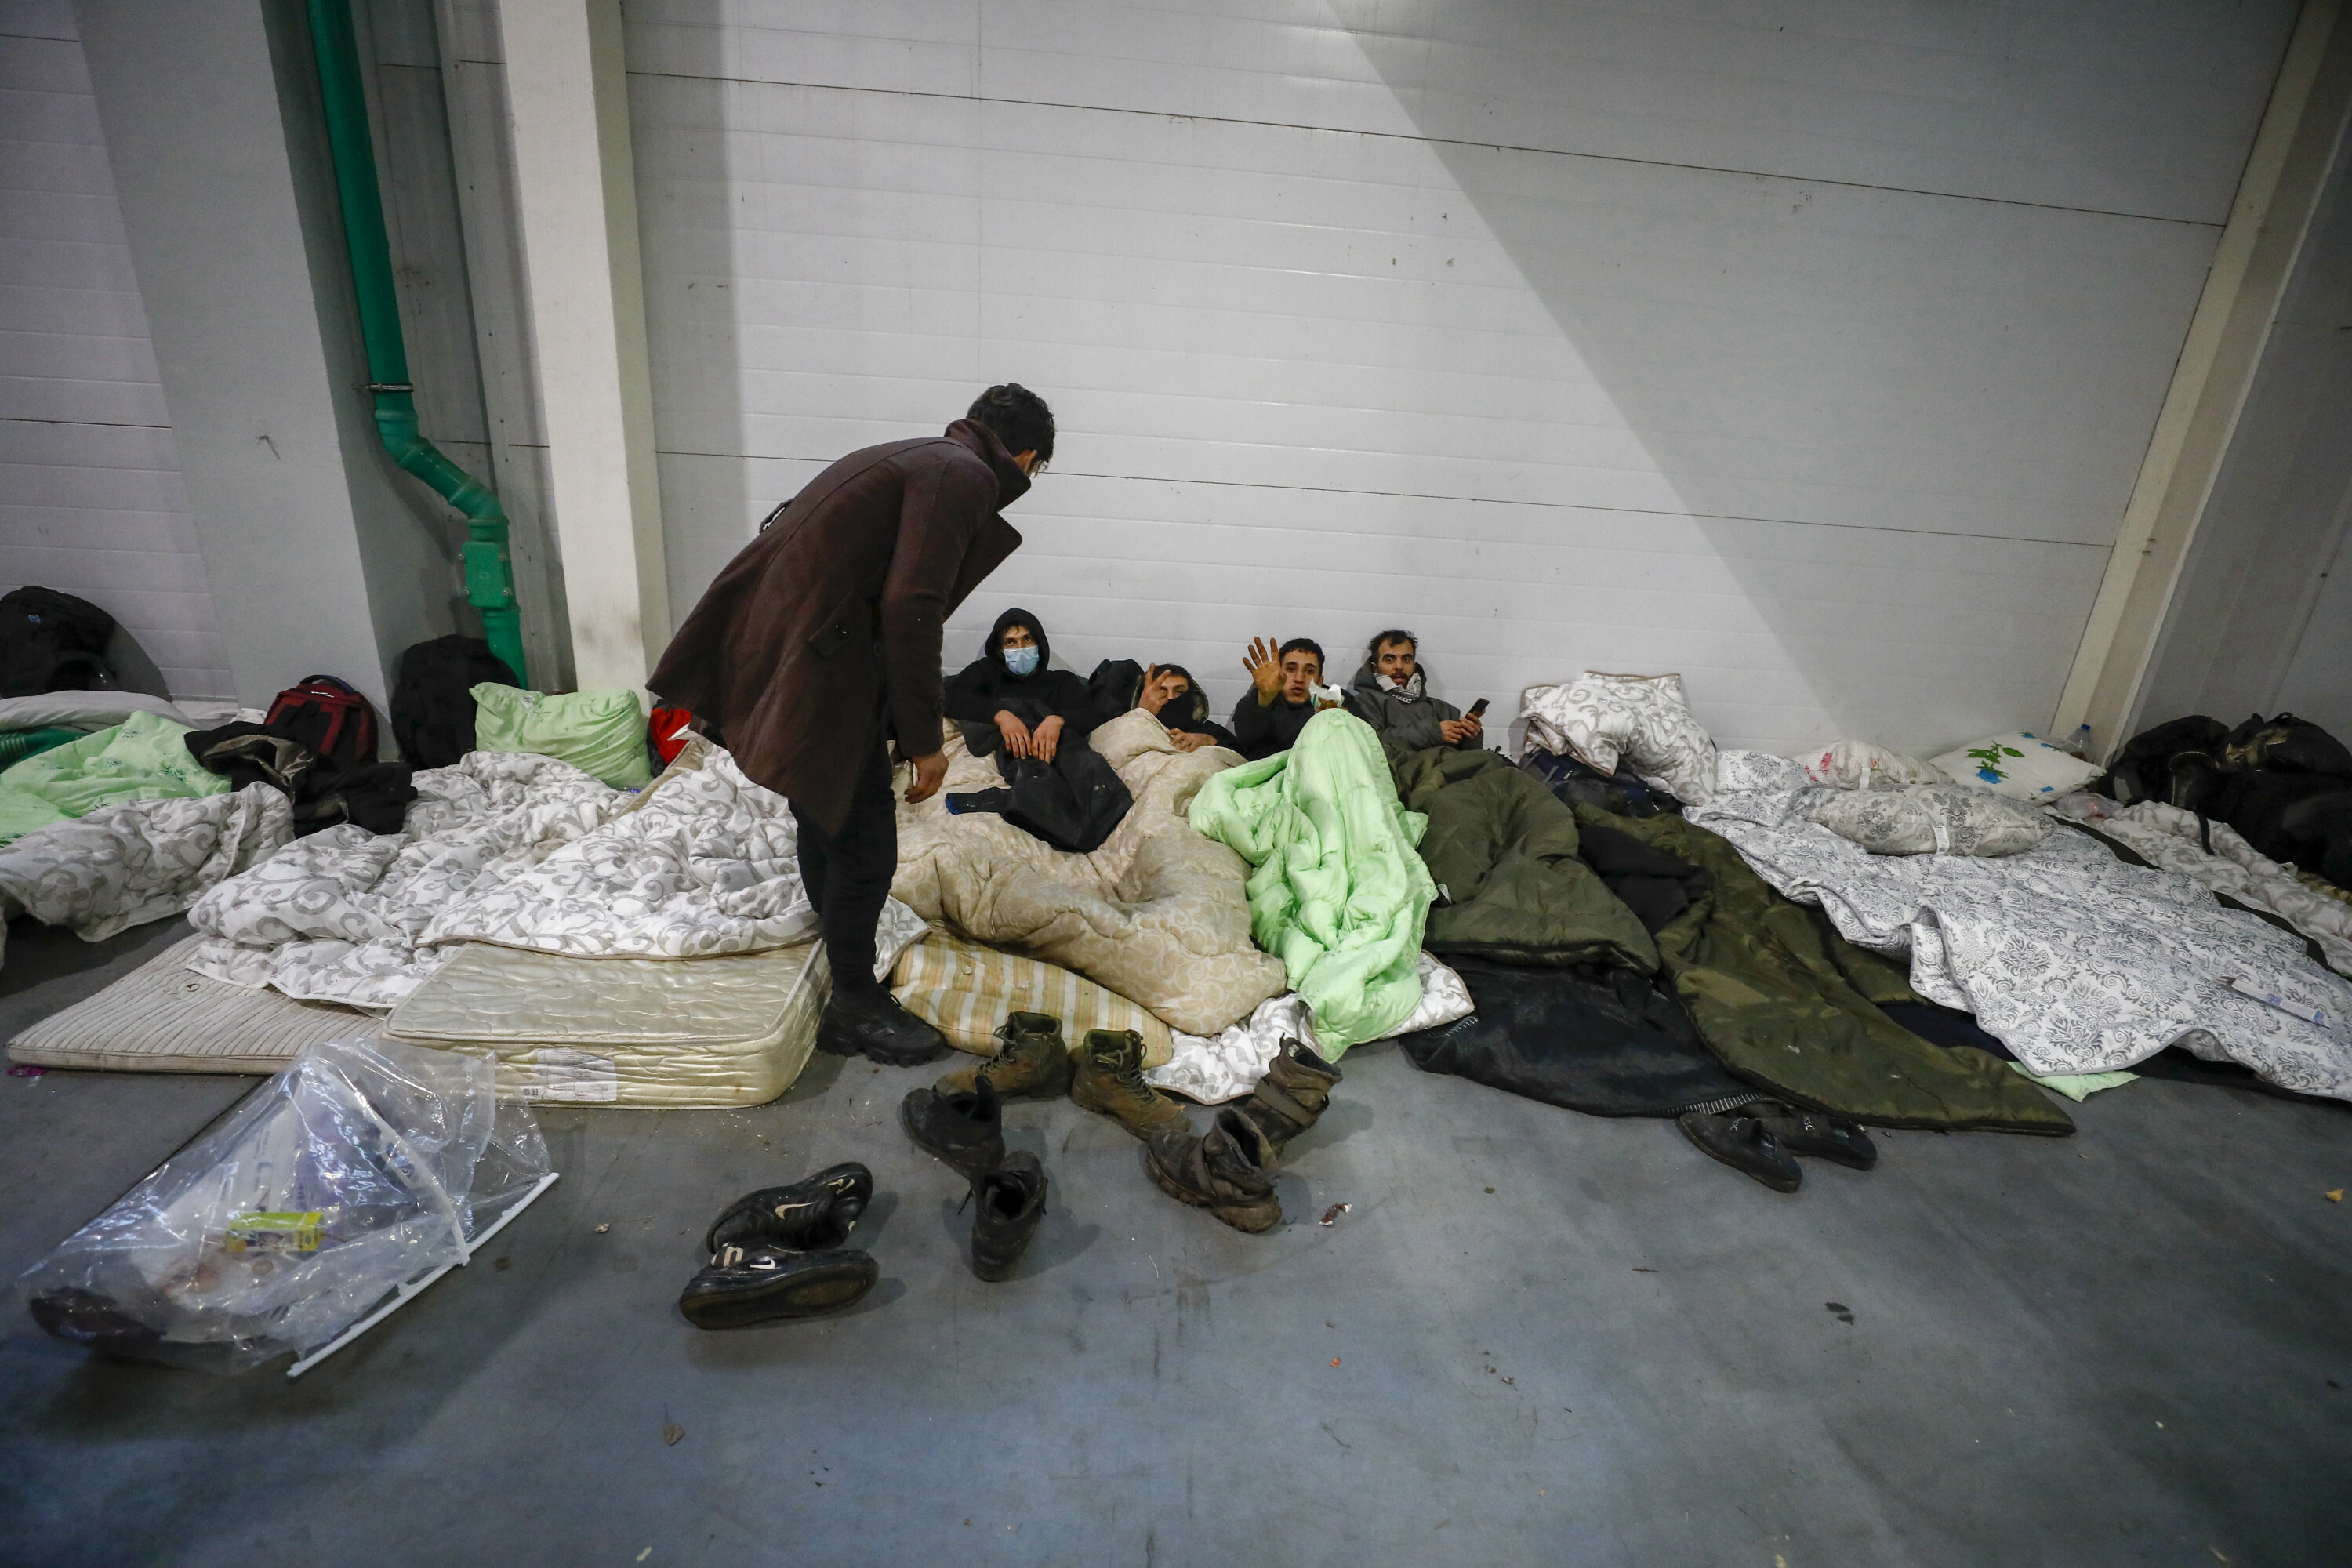 Belarus gov't moves migrants at Polish border to heated warehouse